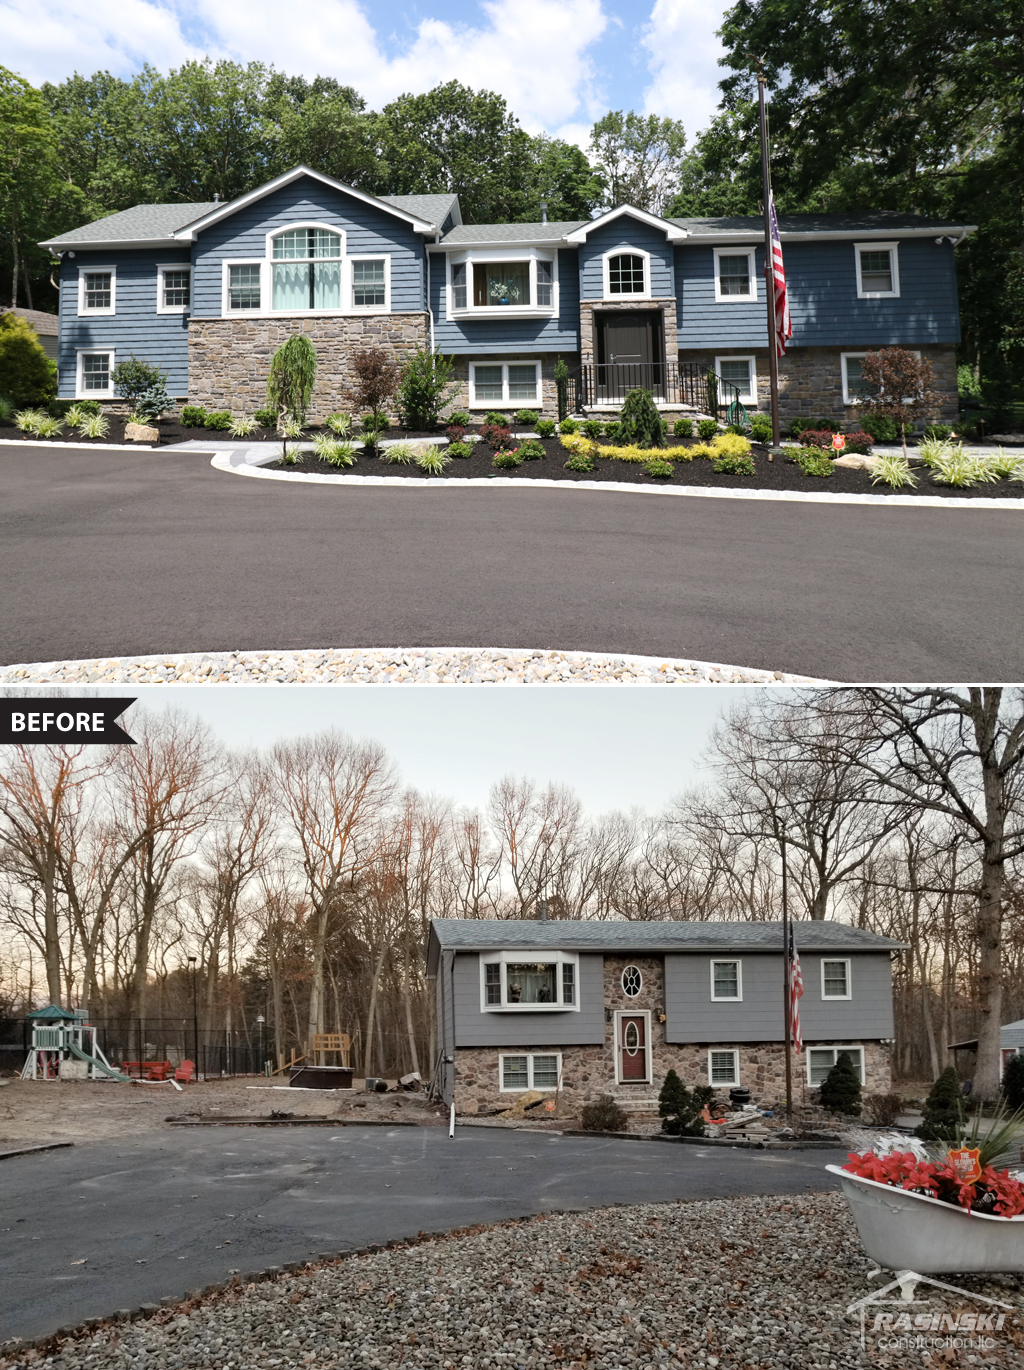 Before and After Home Addition Photos of Project in Monmouth County NJ by Rasinski Construction